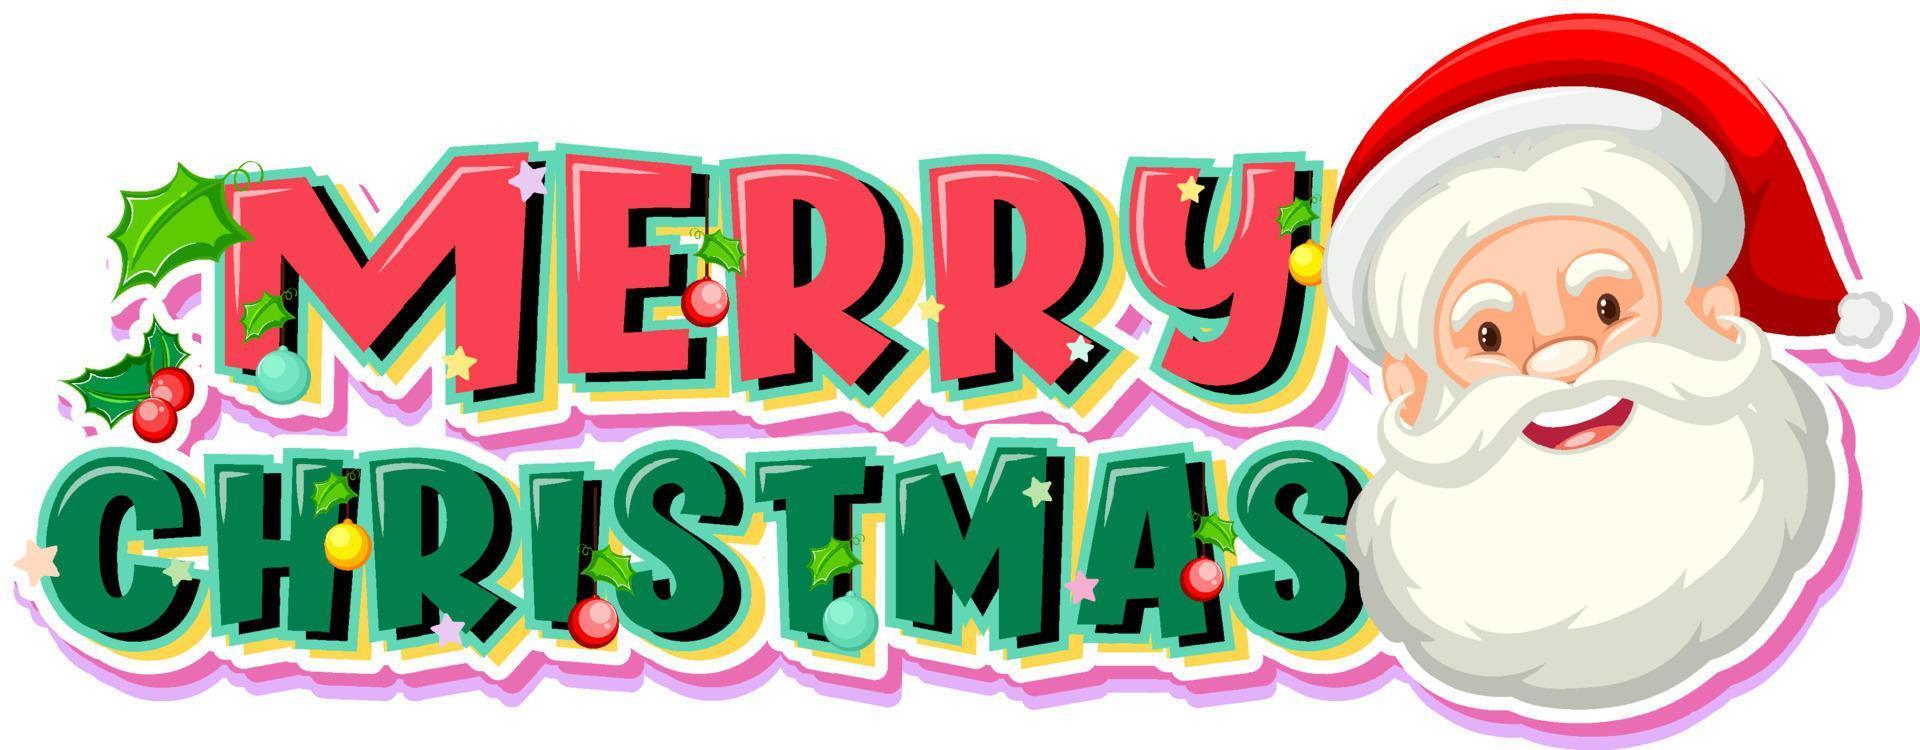 Merry Christmas typography logo with Santa Claus face vector